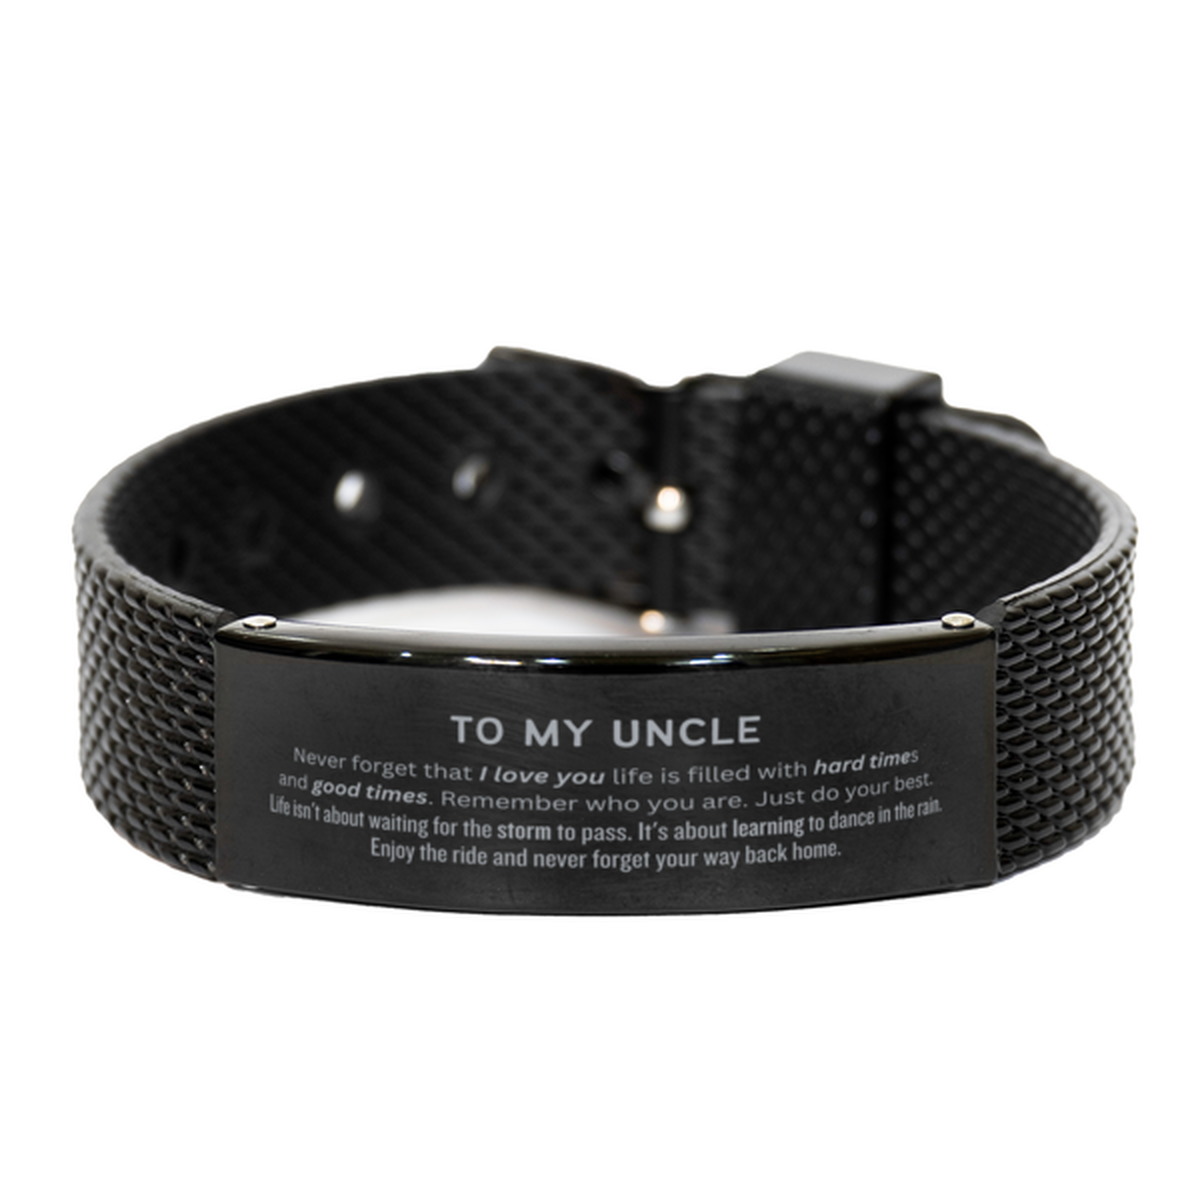 Christmas Uncle Black Shark Mesh Bracelet Gifts, To My Uncle Birthday Thank You Gifts For Uncle, Graduation Unique Gifts For Uncle To My Uncle Never forget that I love you life is filled with hard times and good times. Remember who you are. Just do your b